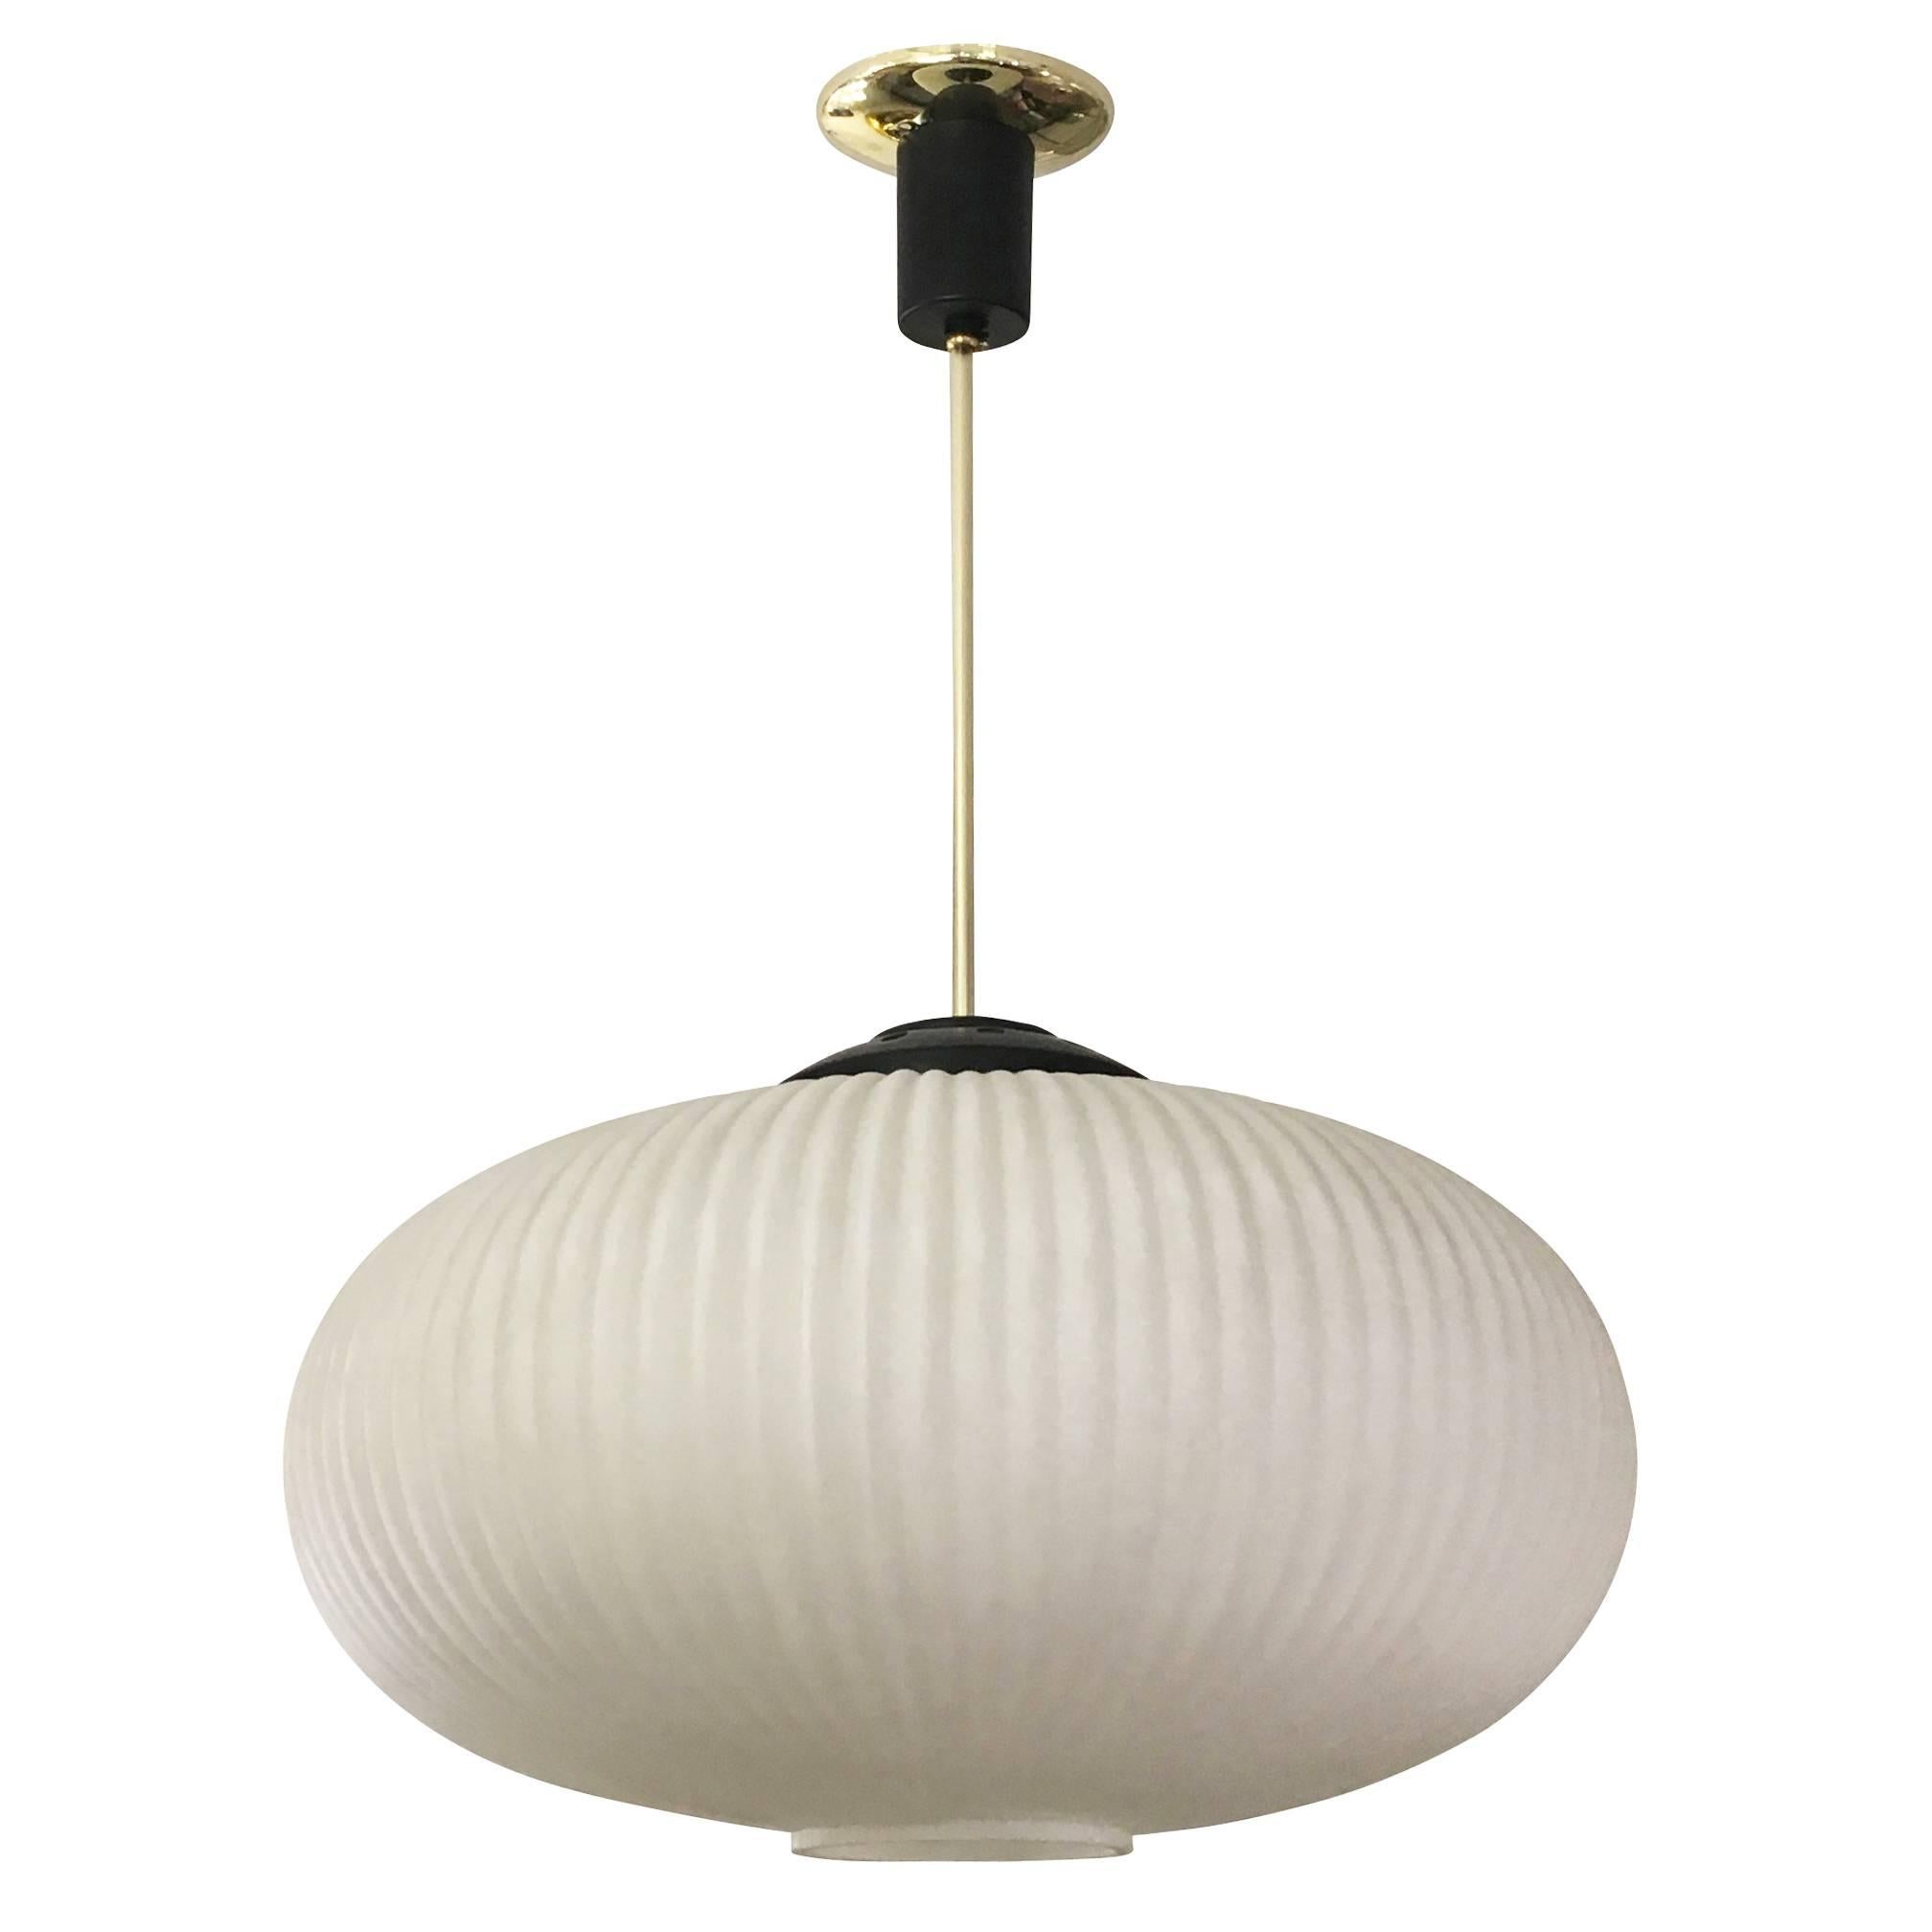 Elegant Mid-Century pendant in the manner of Stilnovo with a large ribbed frosted glass shade. The hardware and stem are lacquered black and brass. Holds one regular socket.